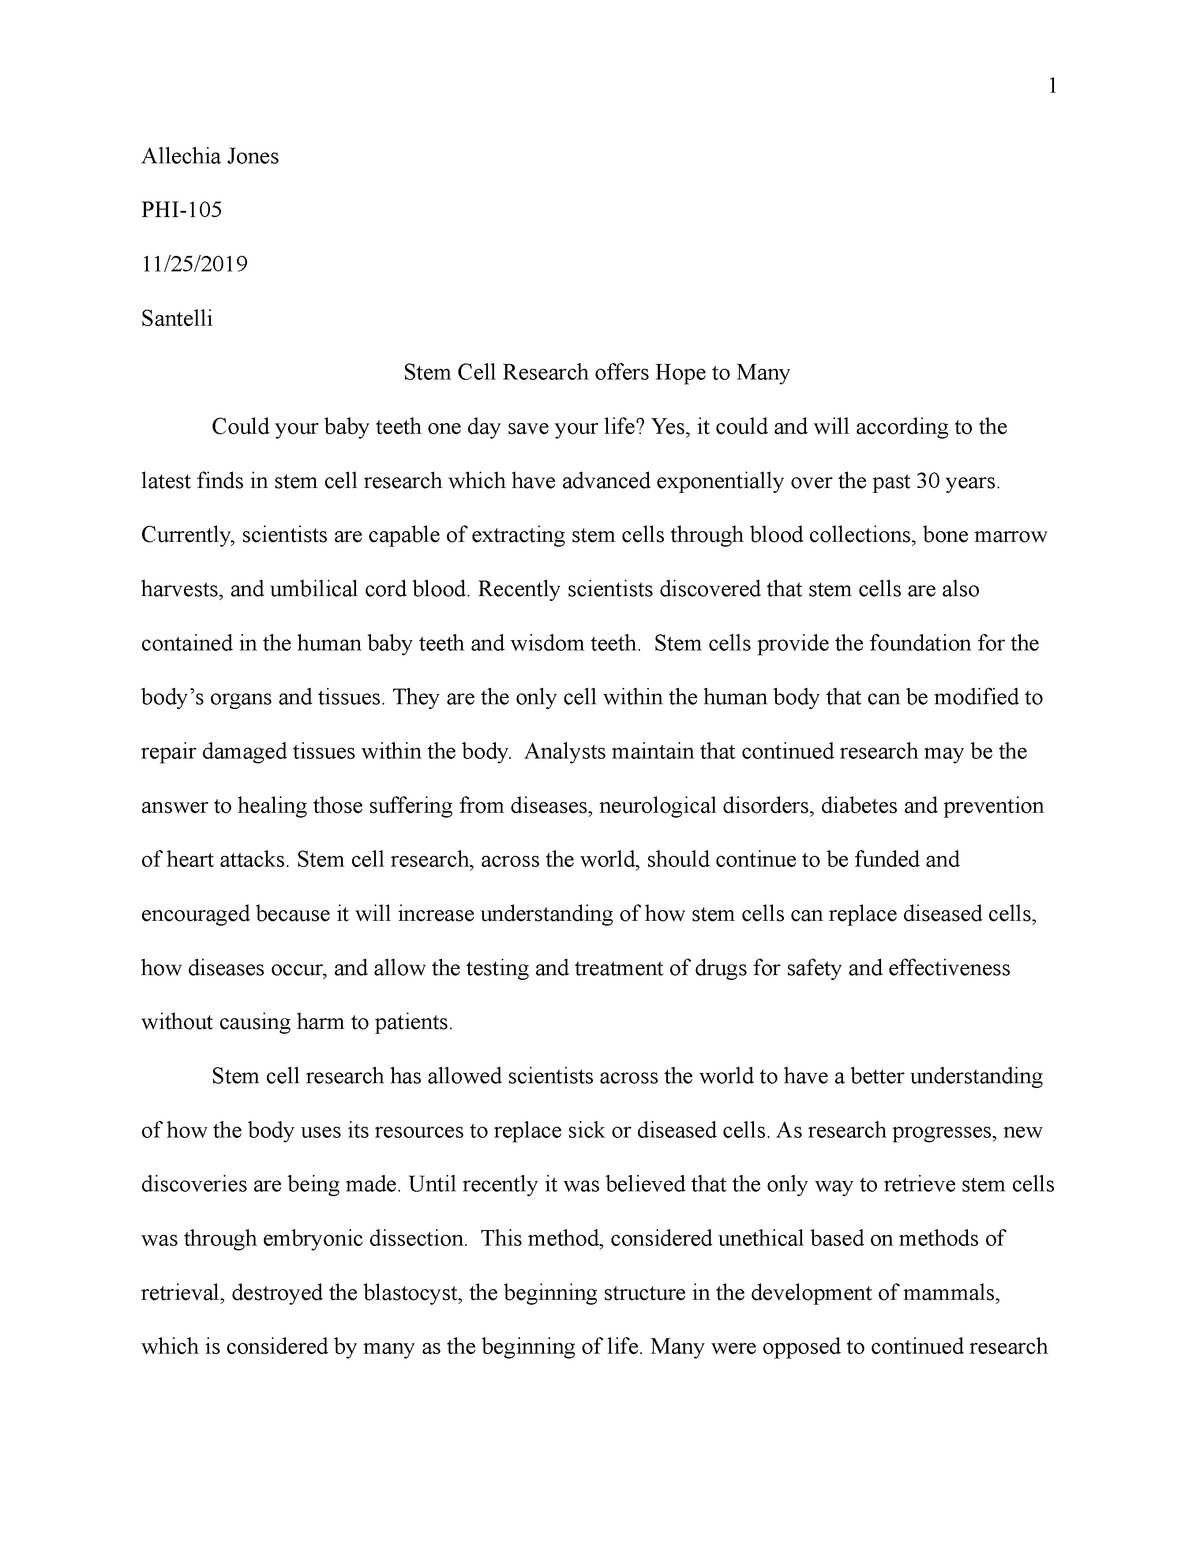 stem cell research persuasive essay